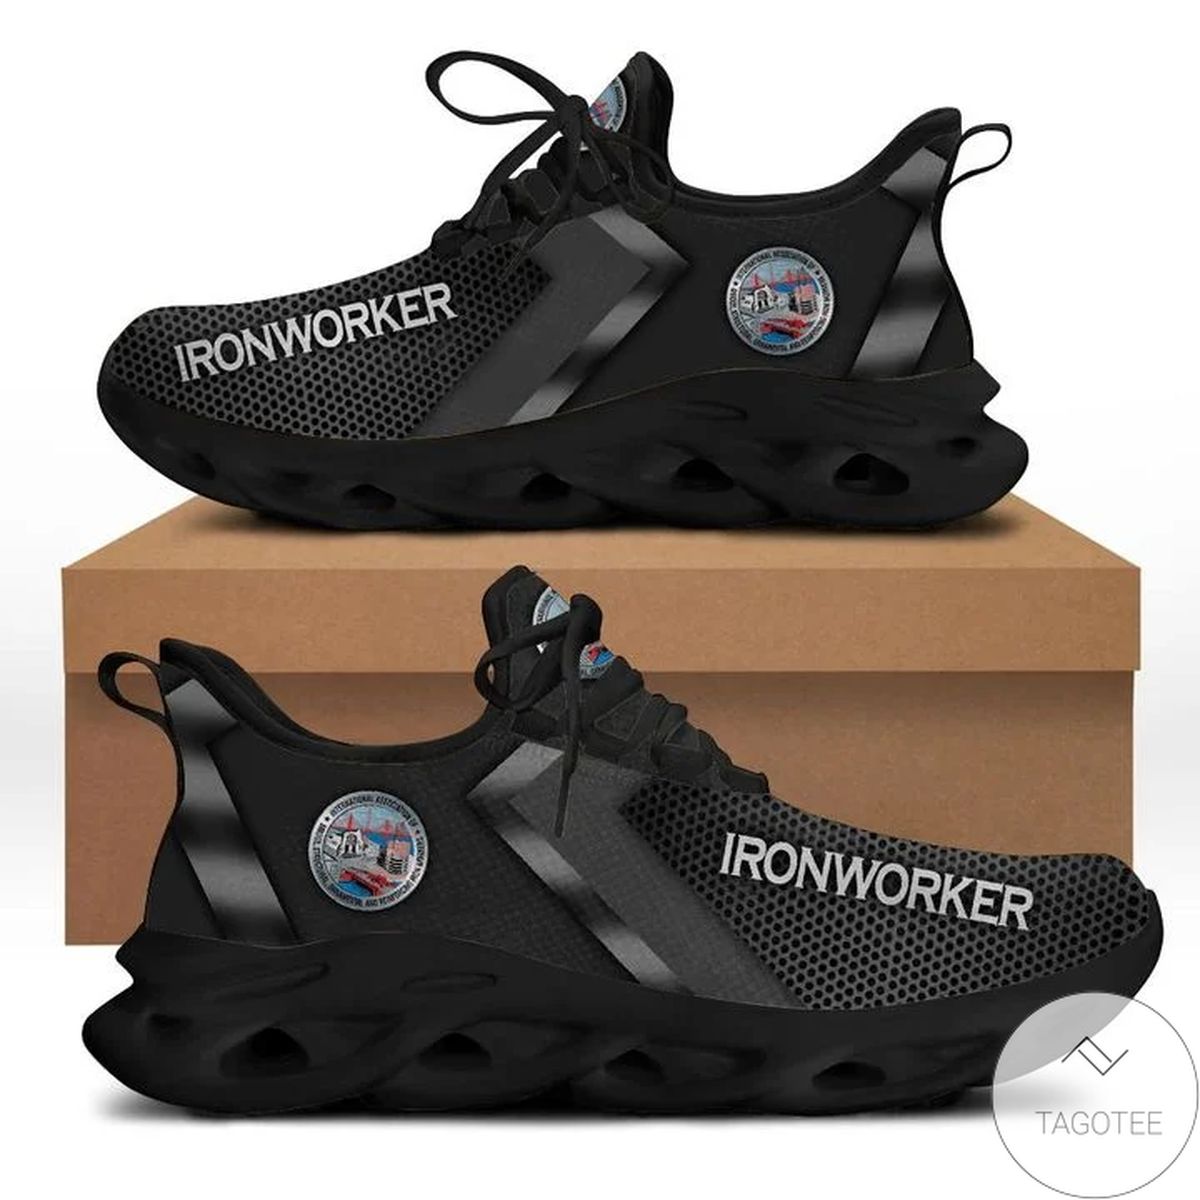 Ironworker Max Soul Shoes